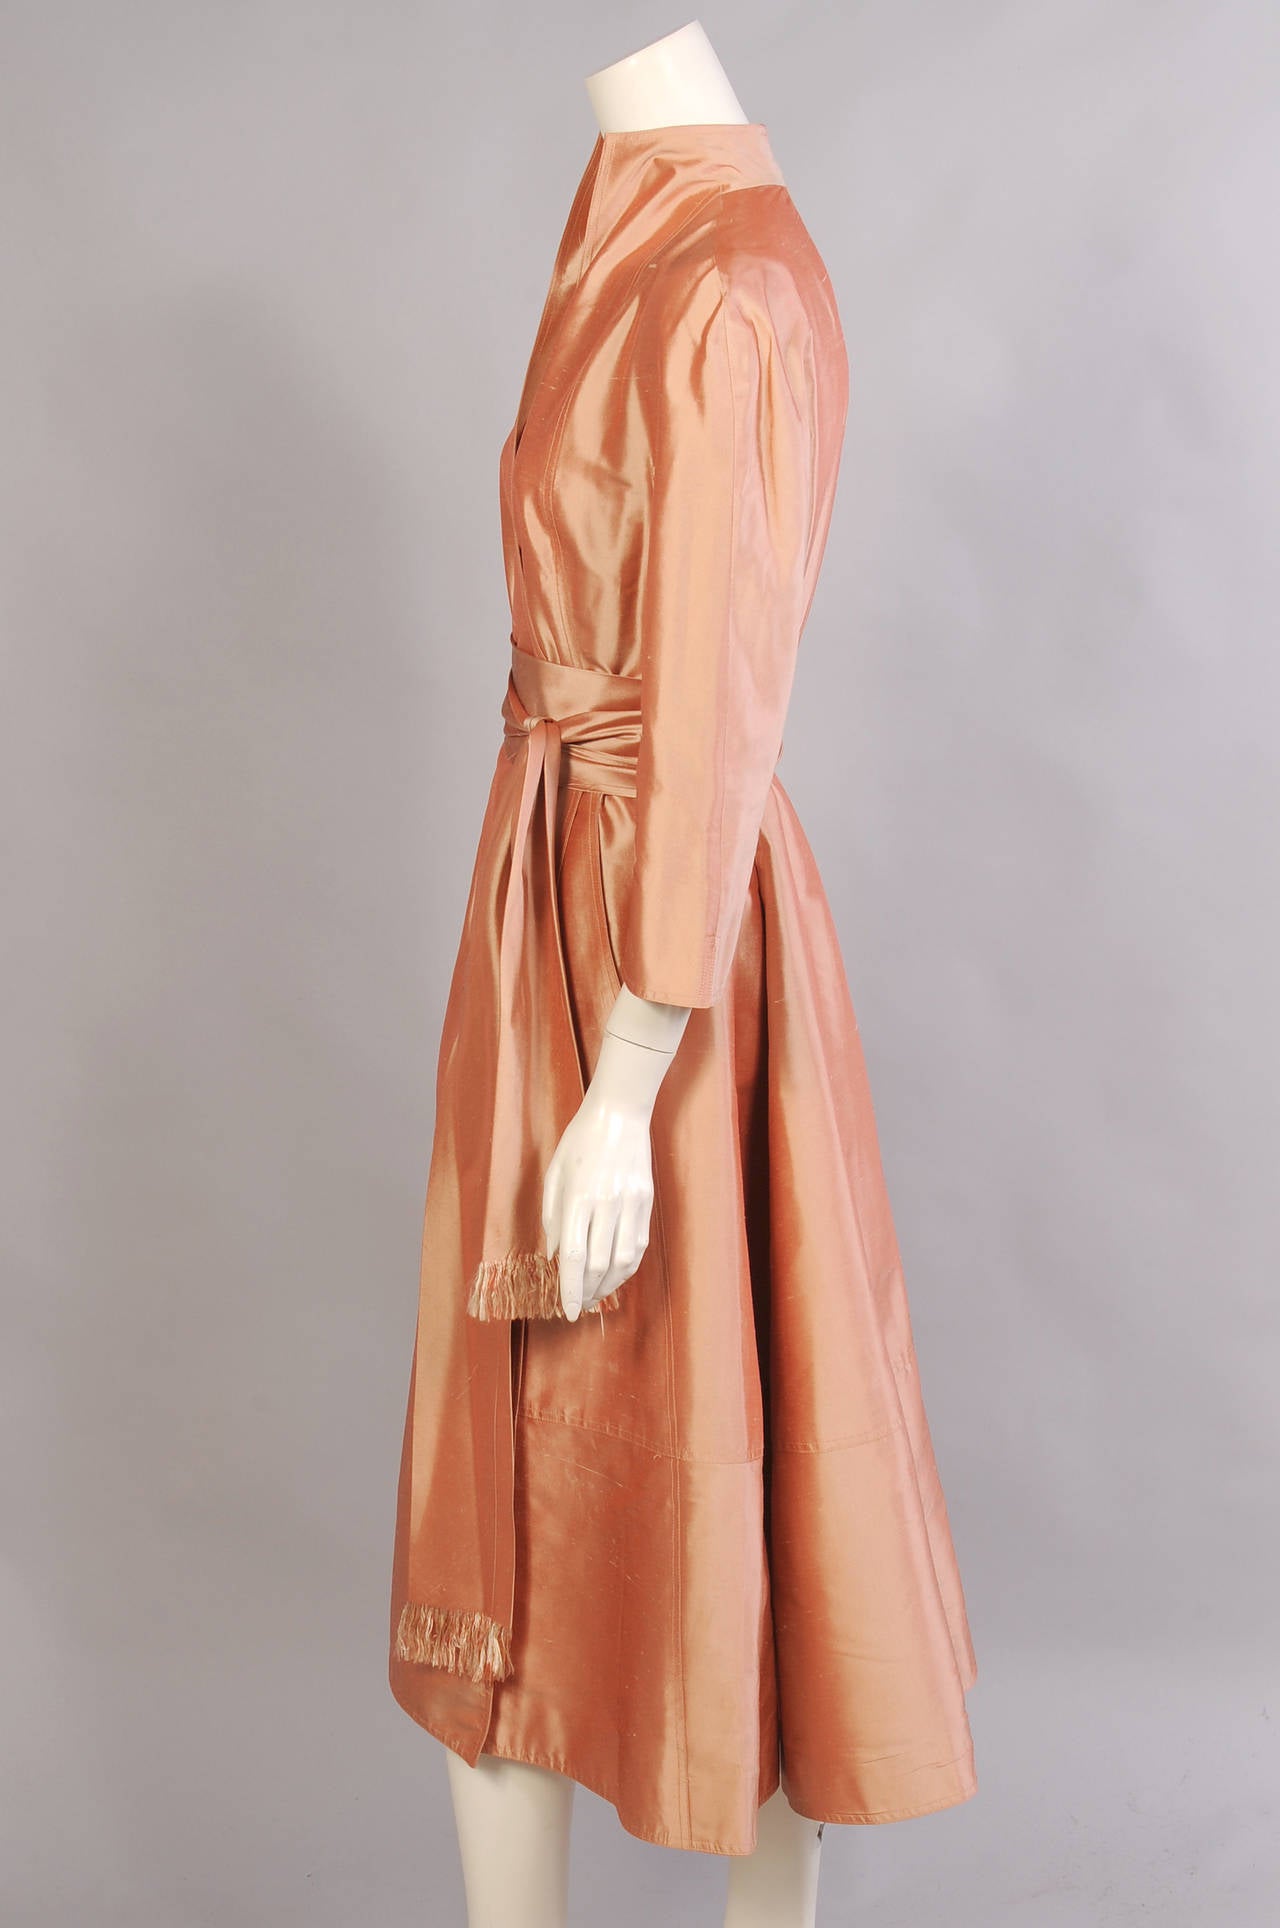 An iridescent silk in a sherbet shade of peach is used for this wrap dress from Ralph Rucci. The dress has a modern version of a Mandarin collar. There are ties inside and it hooks on the left side. There are two pockets hidden in rhe curving seams.